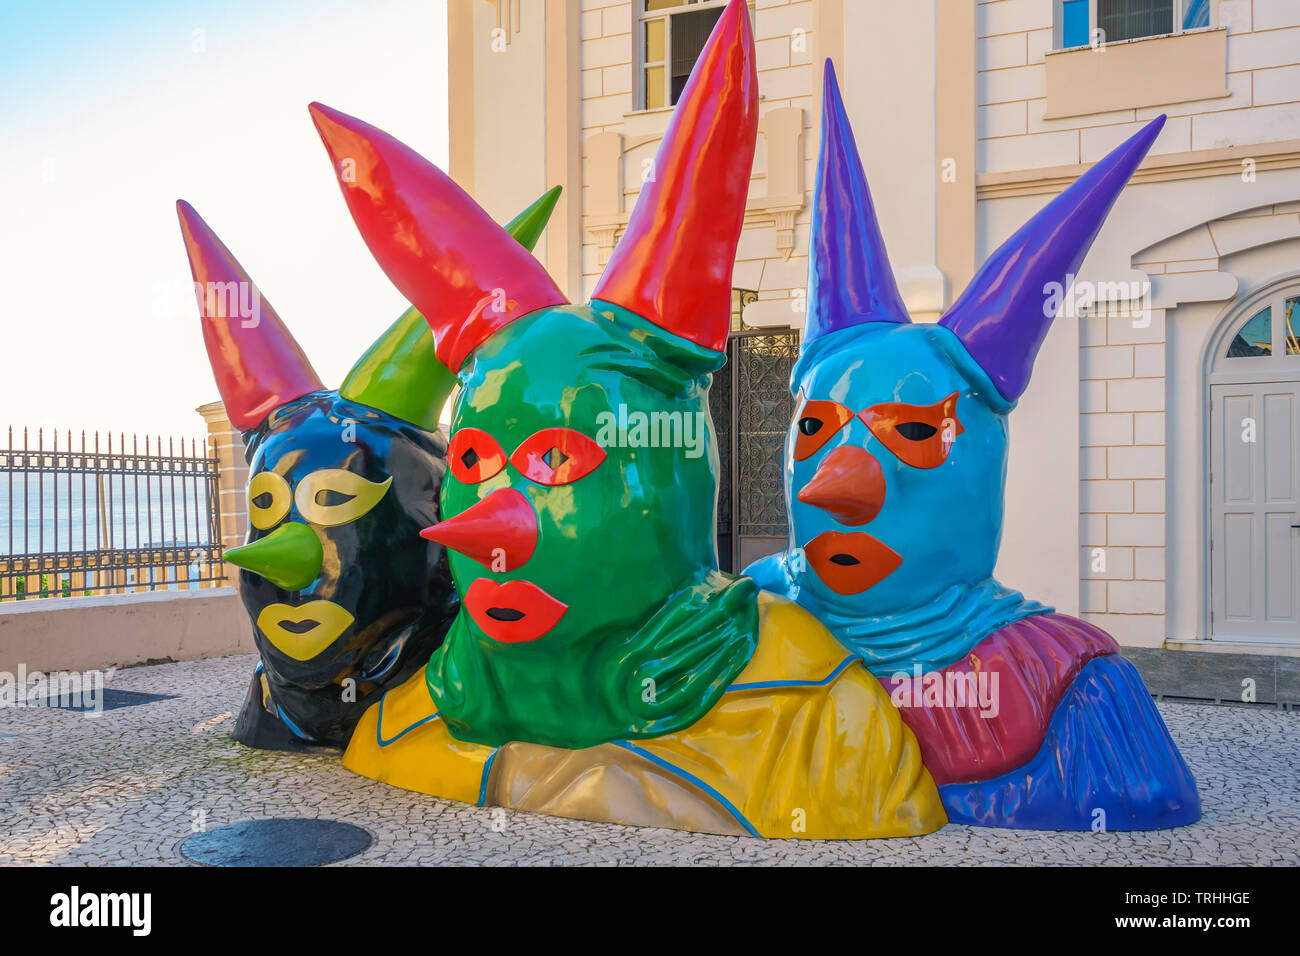 Masked carnival figure sculptures in front of the Casa do Carnaval (House of Carnival) in old town Salvador Bahia Brazil Stock Photo